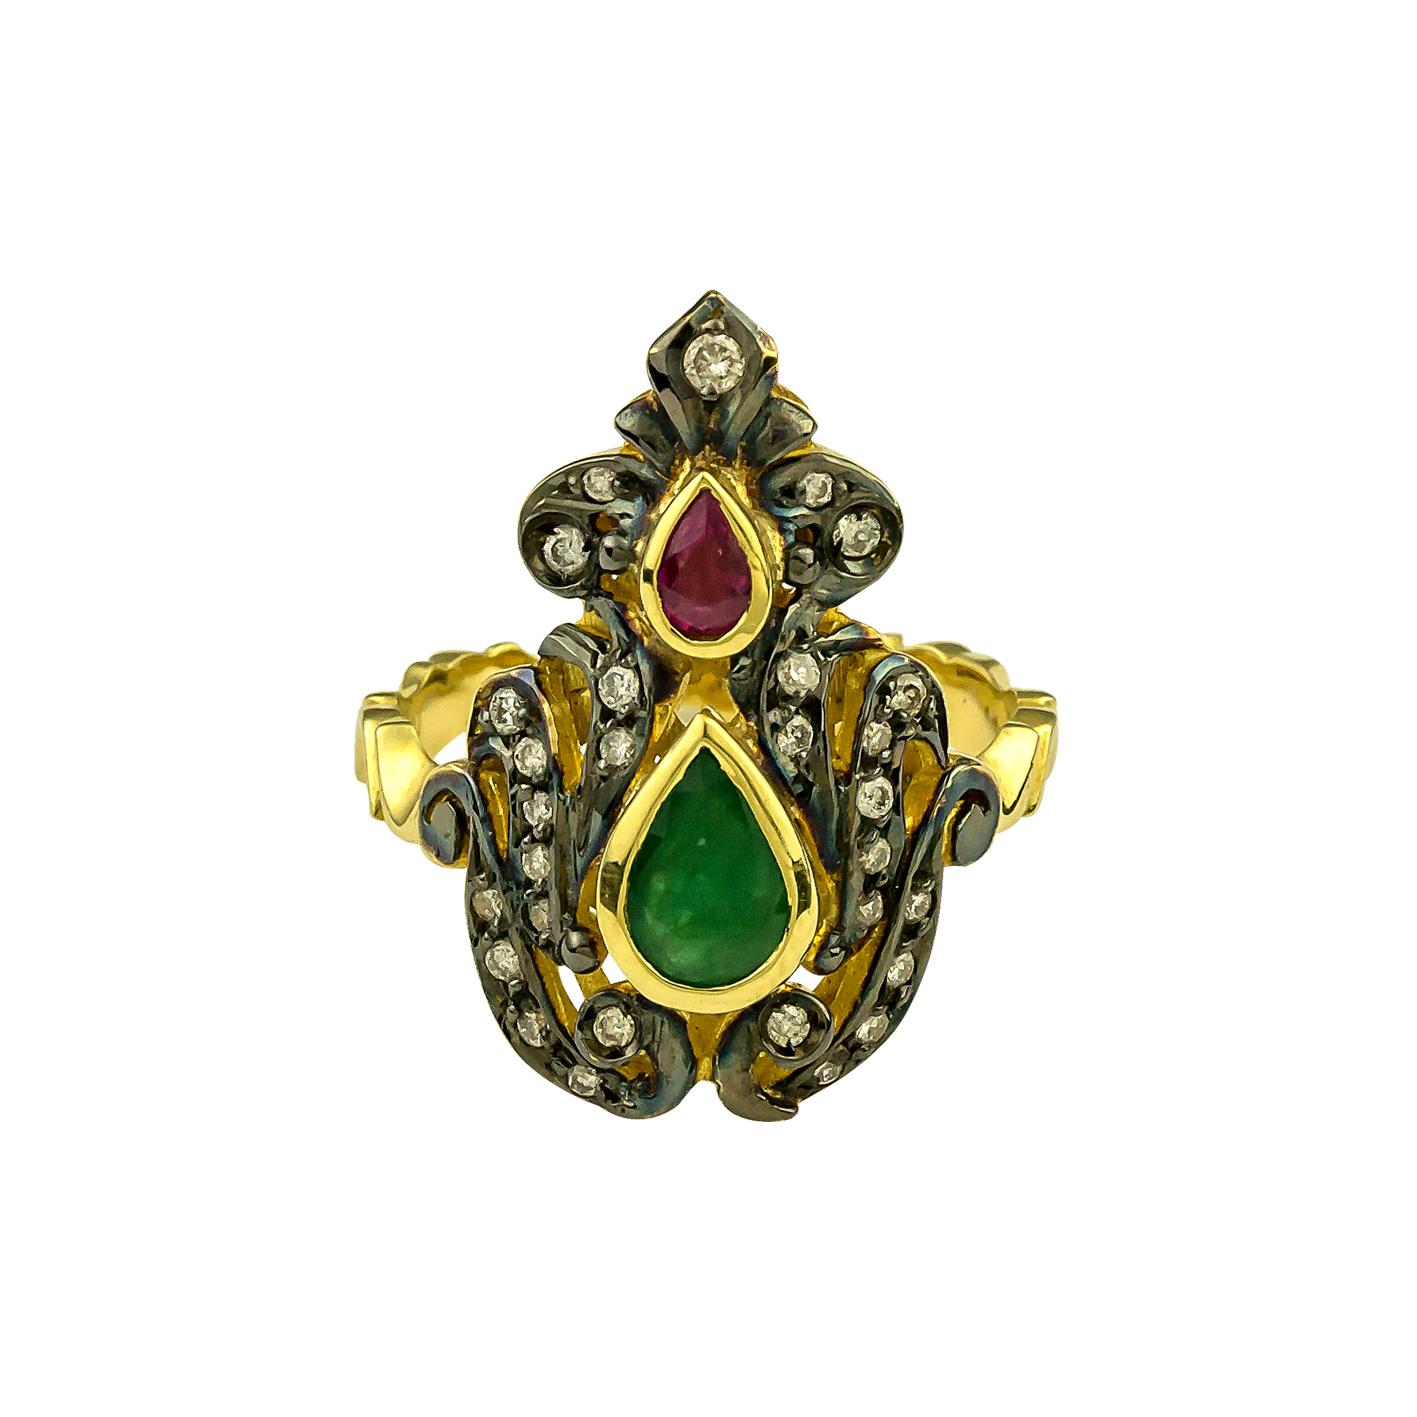 S.Georgios Hand Made 18 Karat Yellow Gold Ring decorated with Byzantine-style granulation and a combination of Diamonds, a Ruby, and an Emerald.
The stunning ring features Brilliant cut Diamonds with a total weight of 0,30 Carat, and a Ruby and an